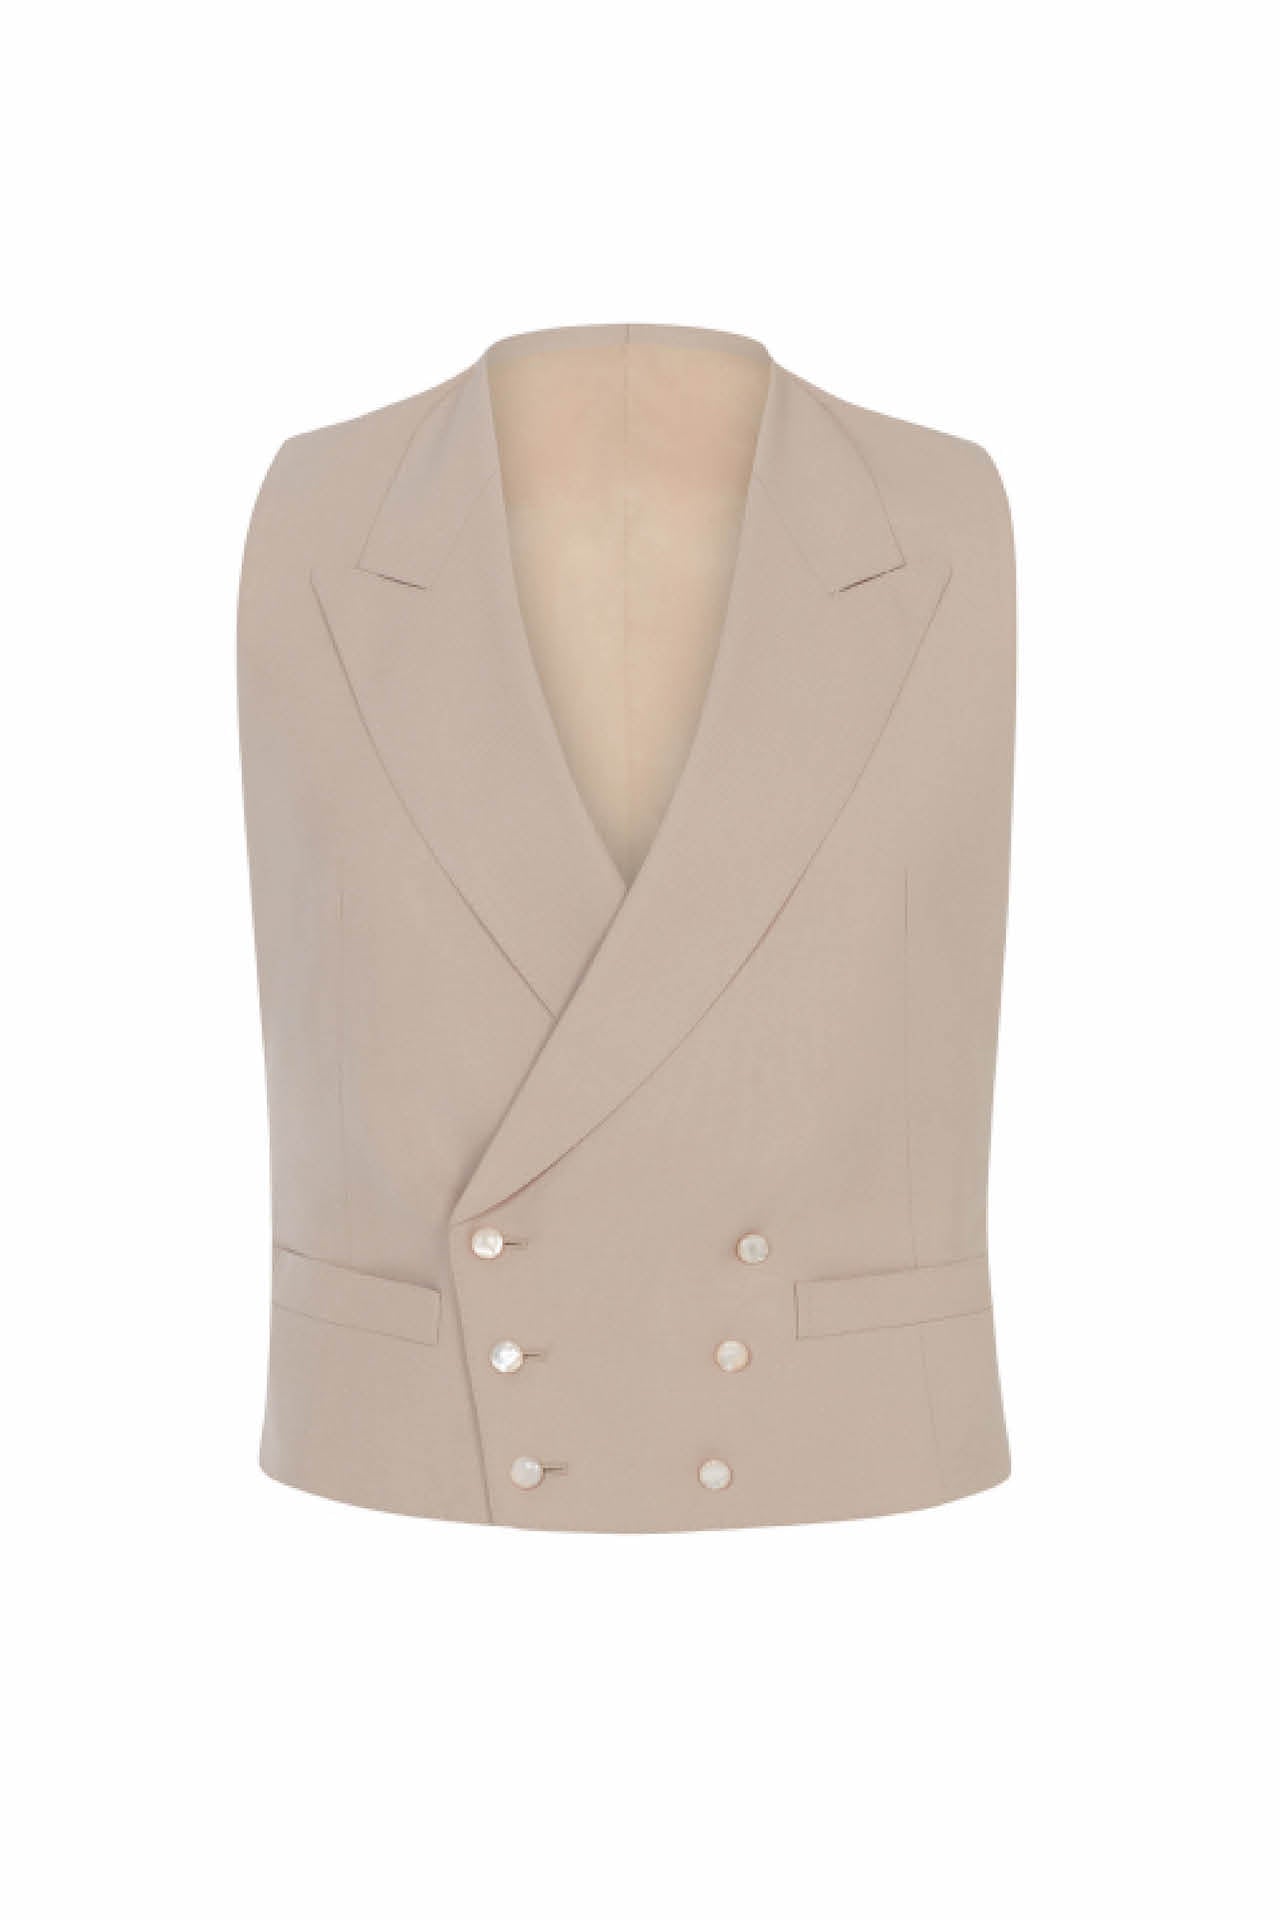 Sand Wool Double Breasted Morning Vest